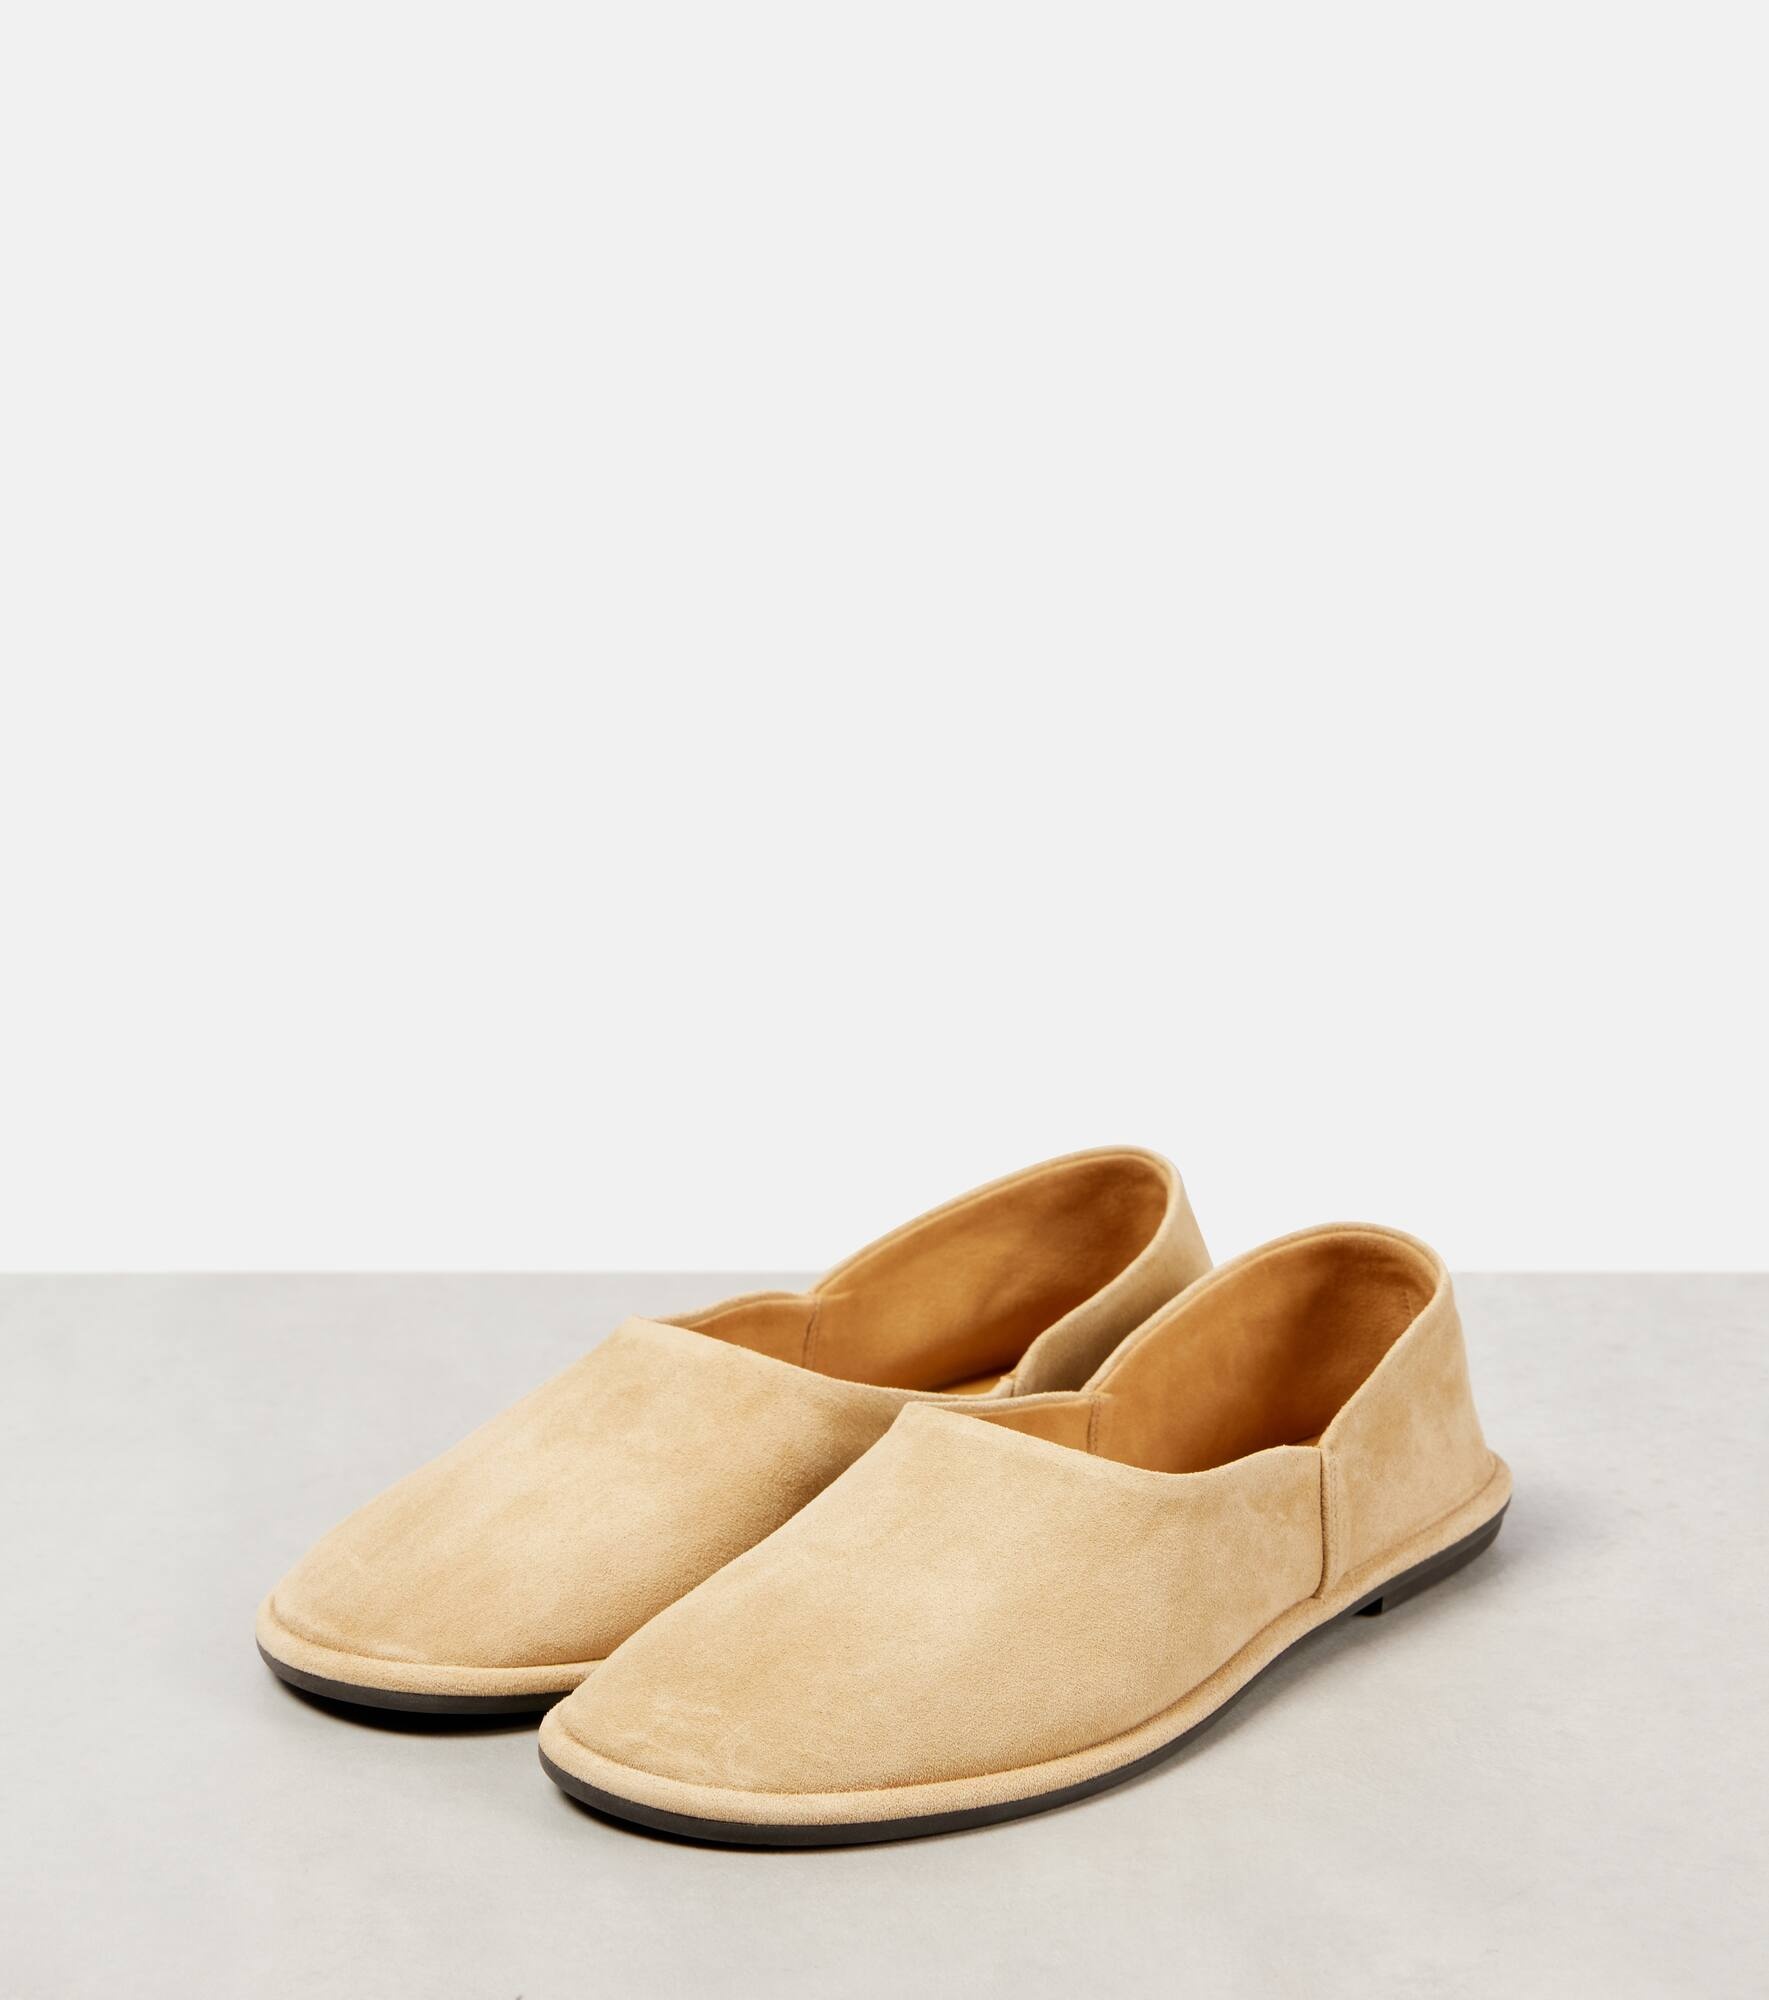 Canal suede slip-on shoes - 3